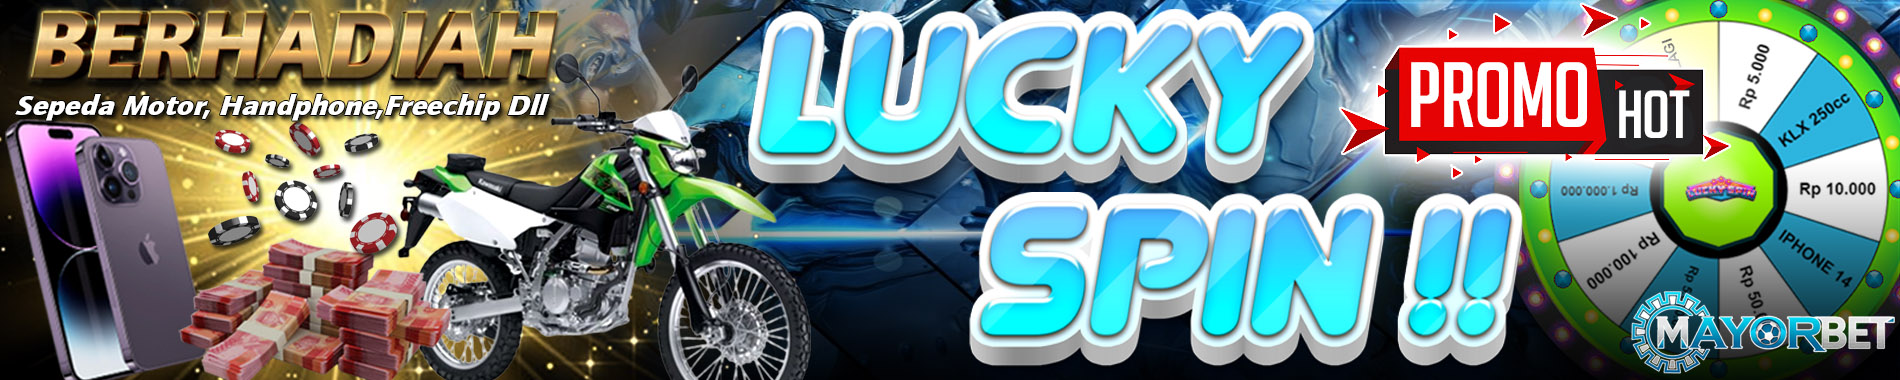 mayorbet - event lucky wheel spin